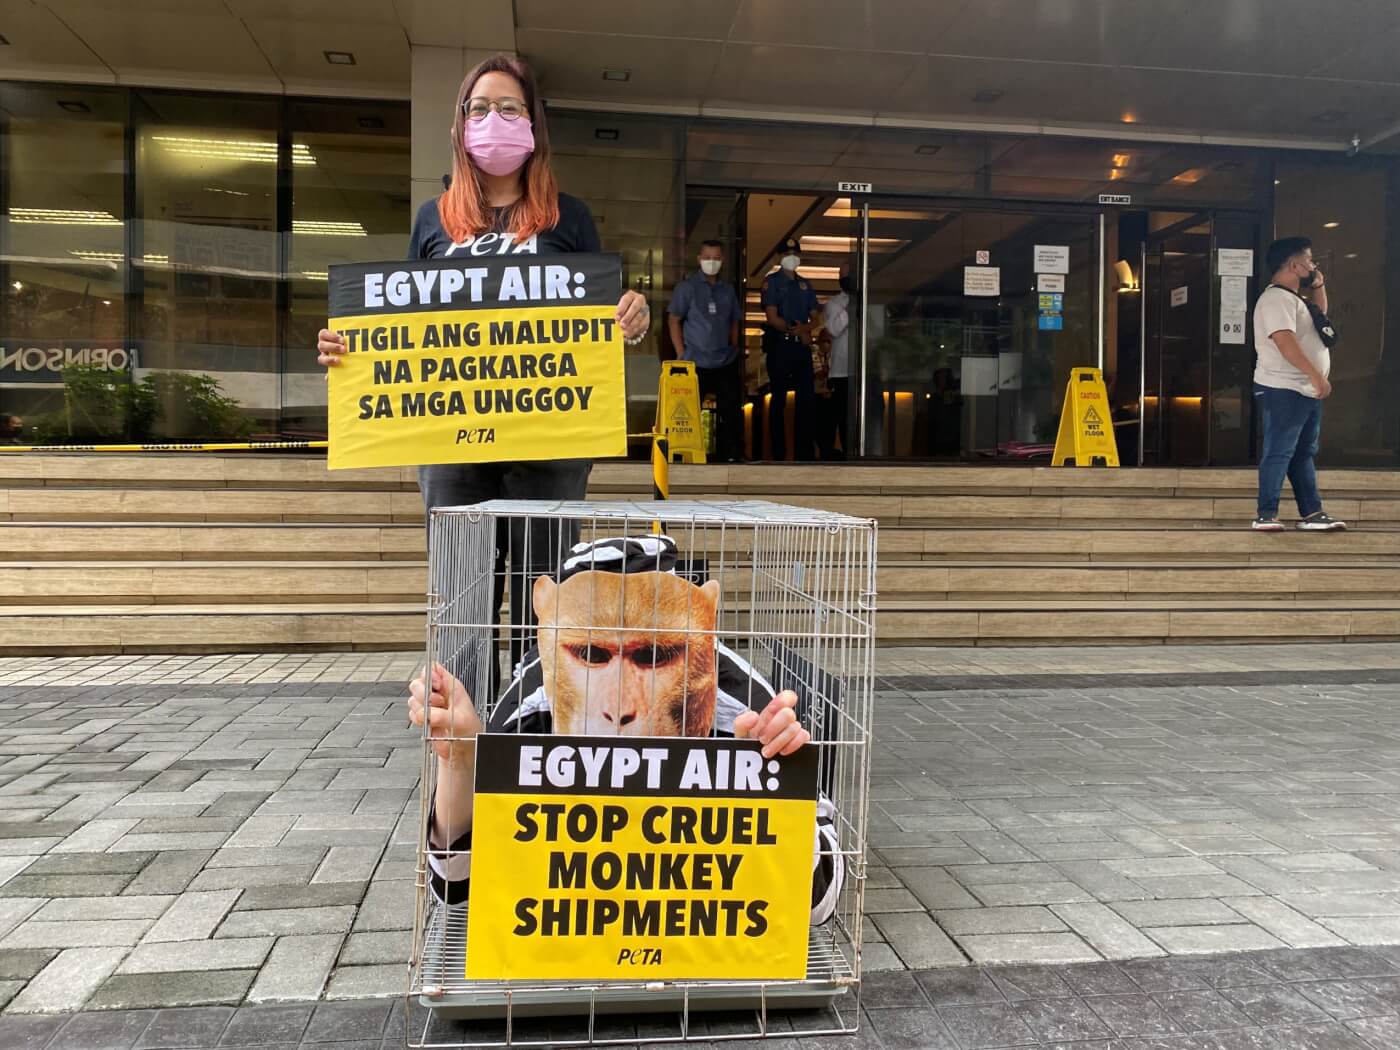 Demonstrators took to the streets outside the Egyptian Embassy in Manila, Philippines, to let folks know that EGYPTAIR continues to ship monkeys to laboratories.